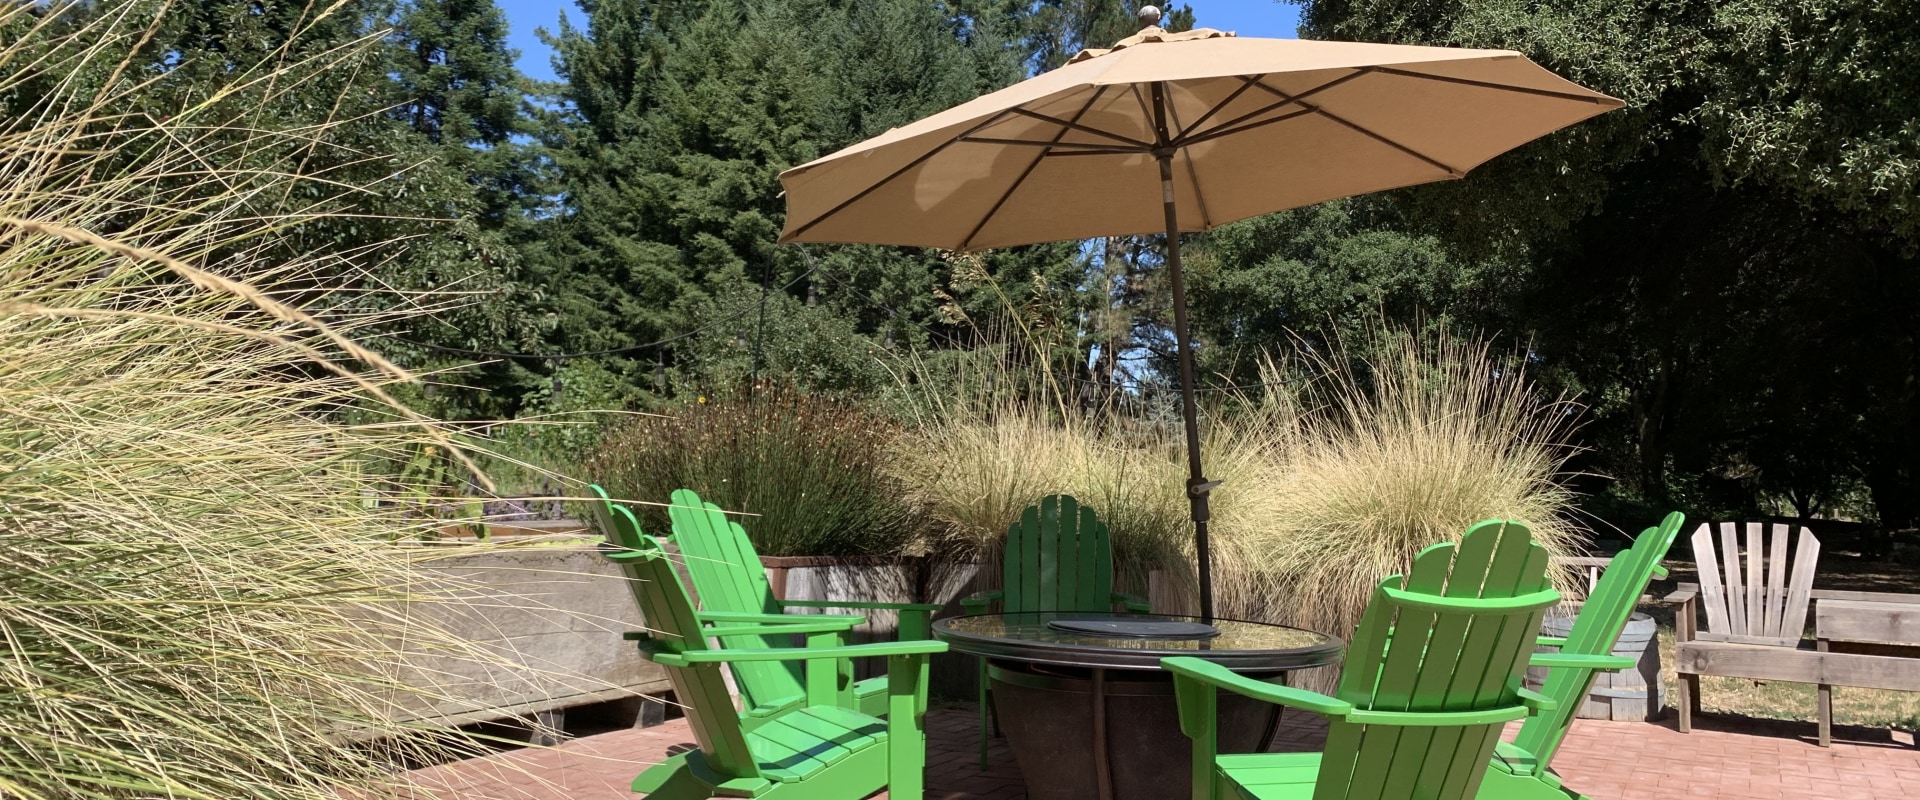 How To Make The Most Of Your Cidery Tour Experience In Santa Rosa